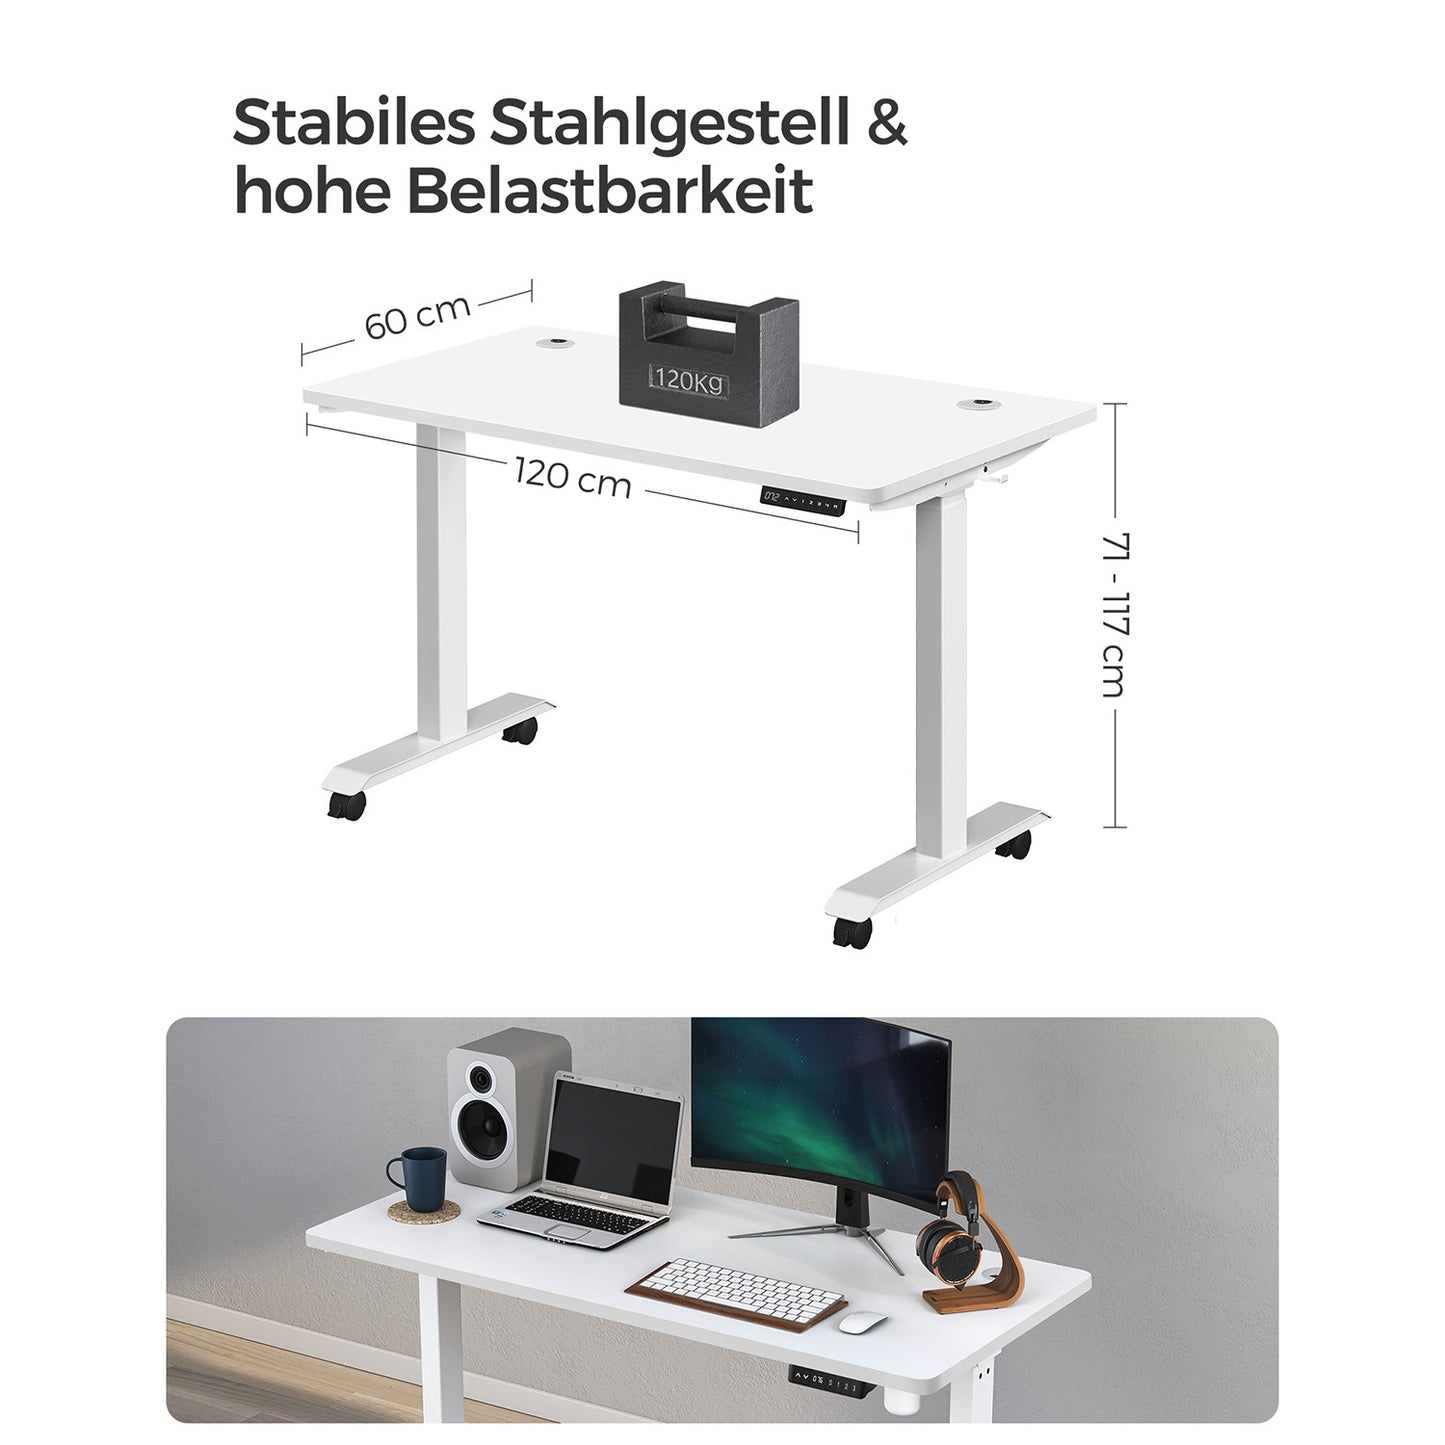 Height-adjustable desk with collision protection